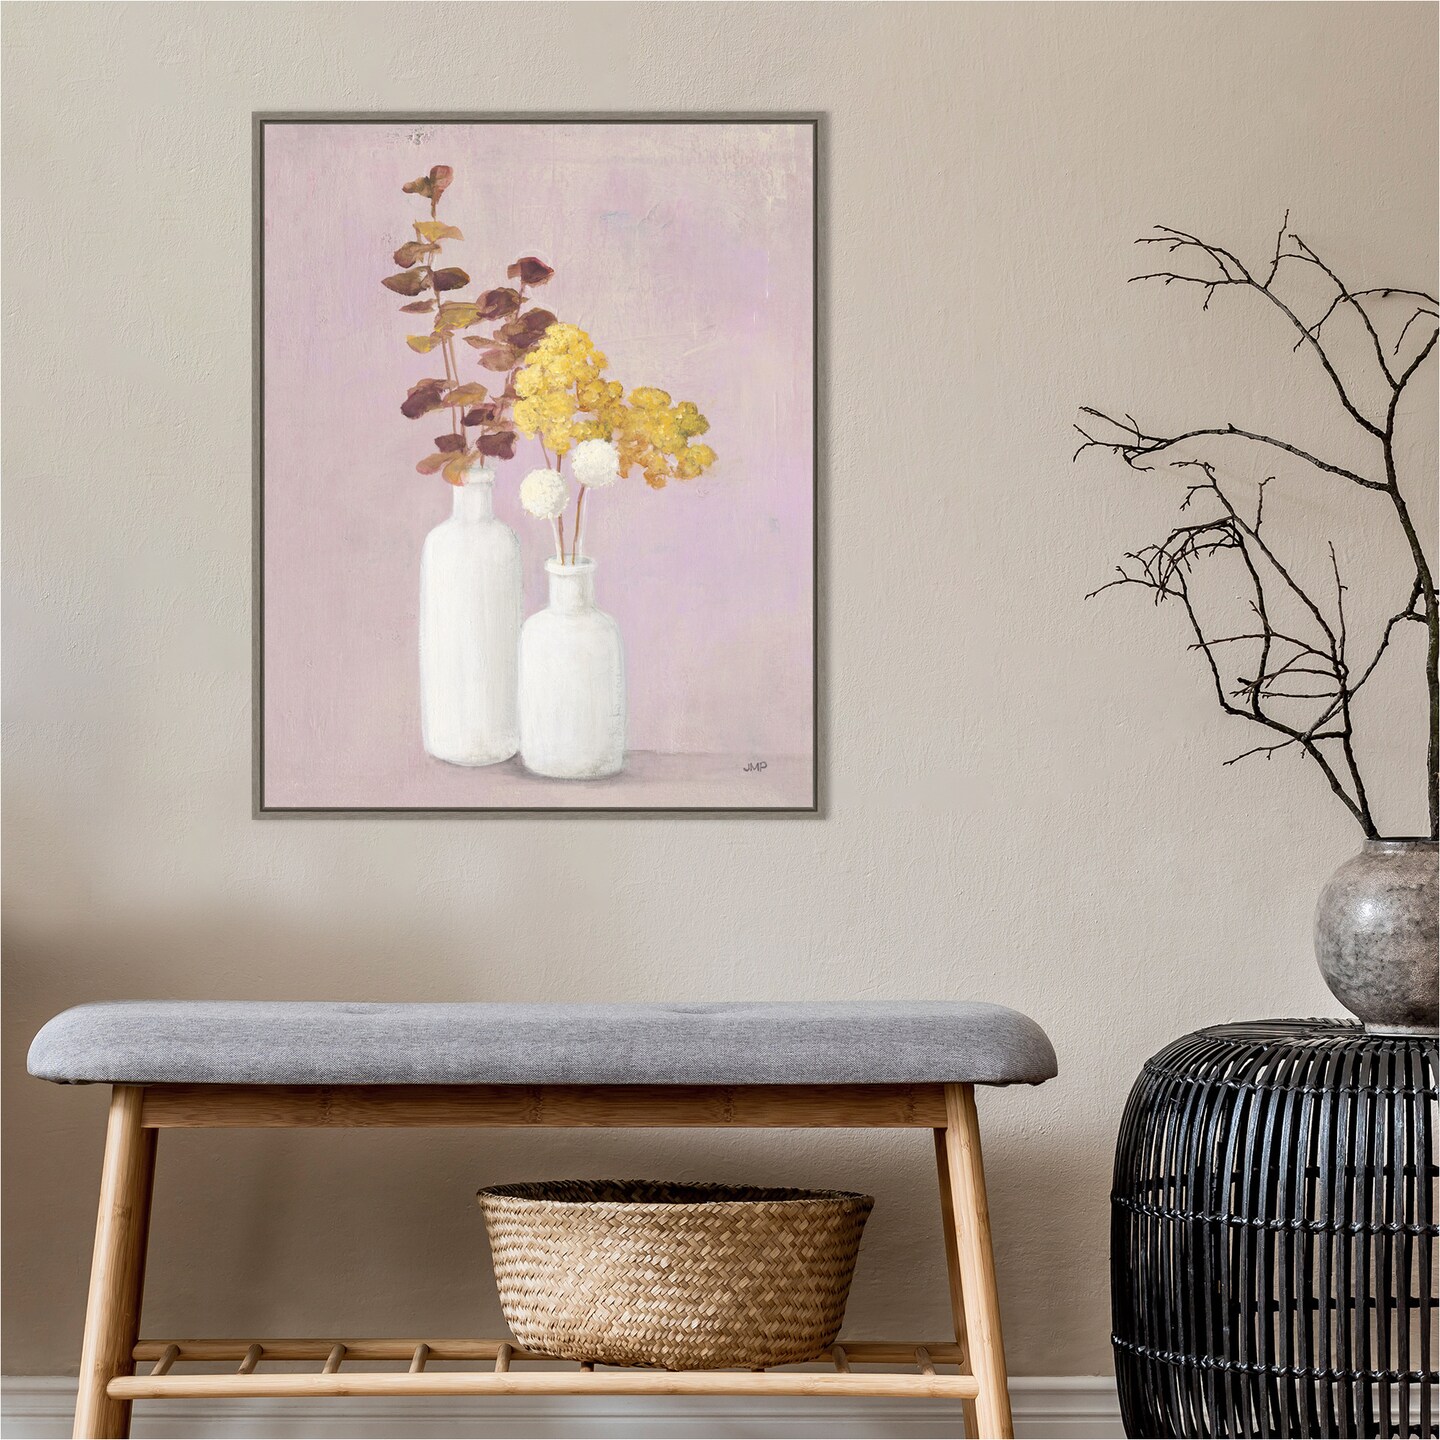 Autumn Greenhouse VI by Julia Purinton 23-in. W x 28-in. H. Canvas Wall Art Print Framed in Grey